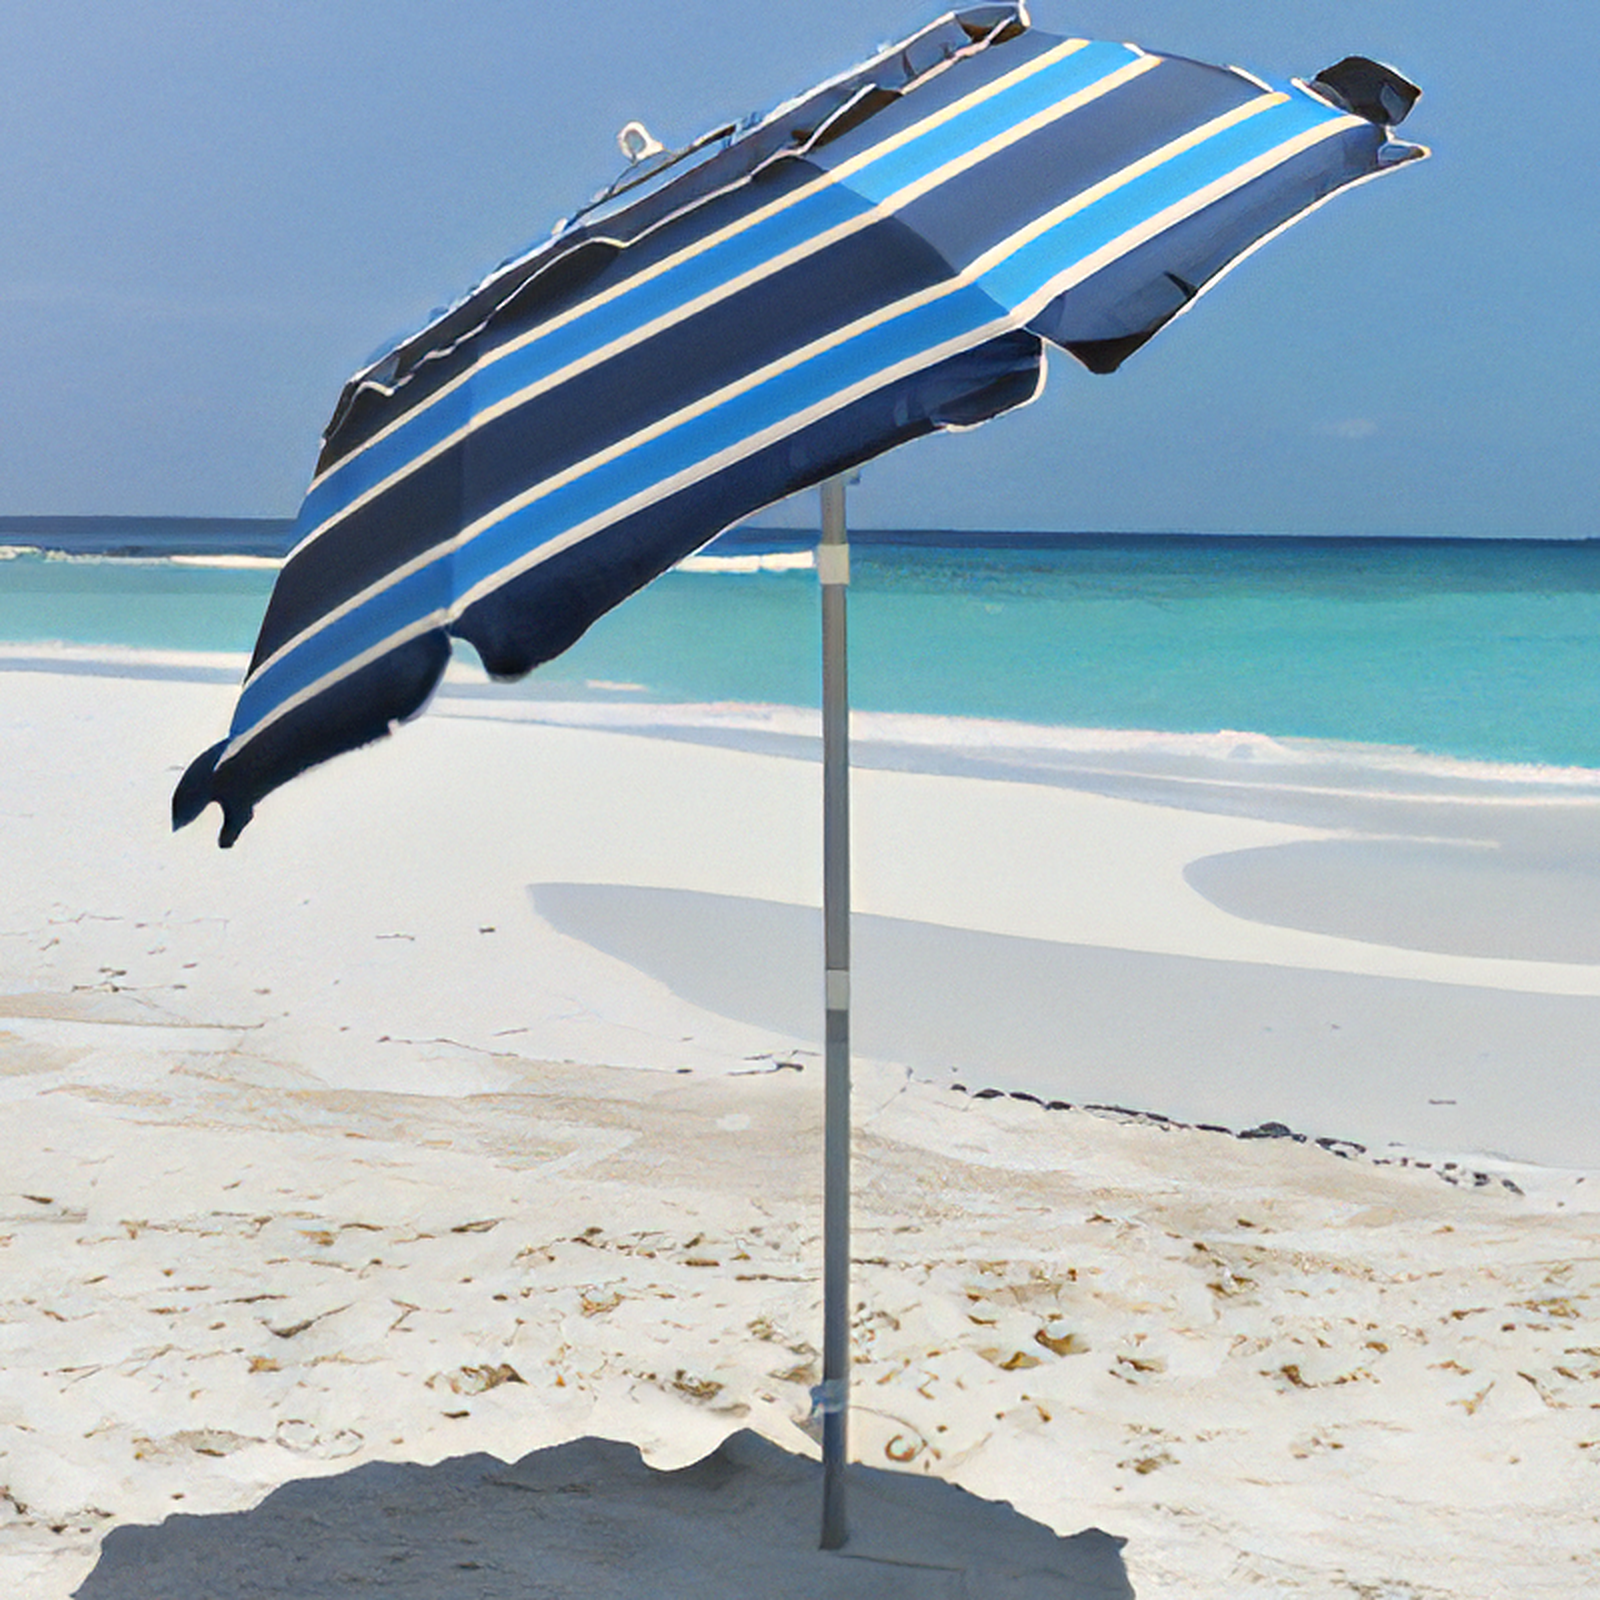 PortaBrella® - Portabrella Canada Introducing PortaBrella®, the world's most versatile travel beach umbrella on the market! Boasting a full umbrella arc of over 76 inches when open, the PortaBrella® ingeniously collapses to a mere 24 inches x 4 inches, effortlessly fitting into most suitcases. Weighing just 4.5 pounds, it's the perfect companion for vacation-goers or beach enthusiasts who lack the space to carry a full-sized umbrella.